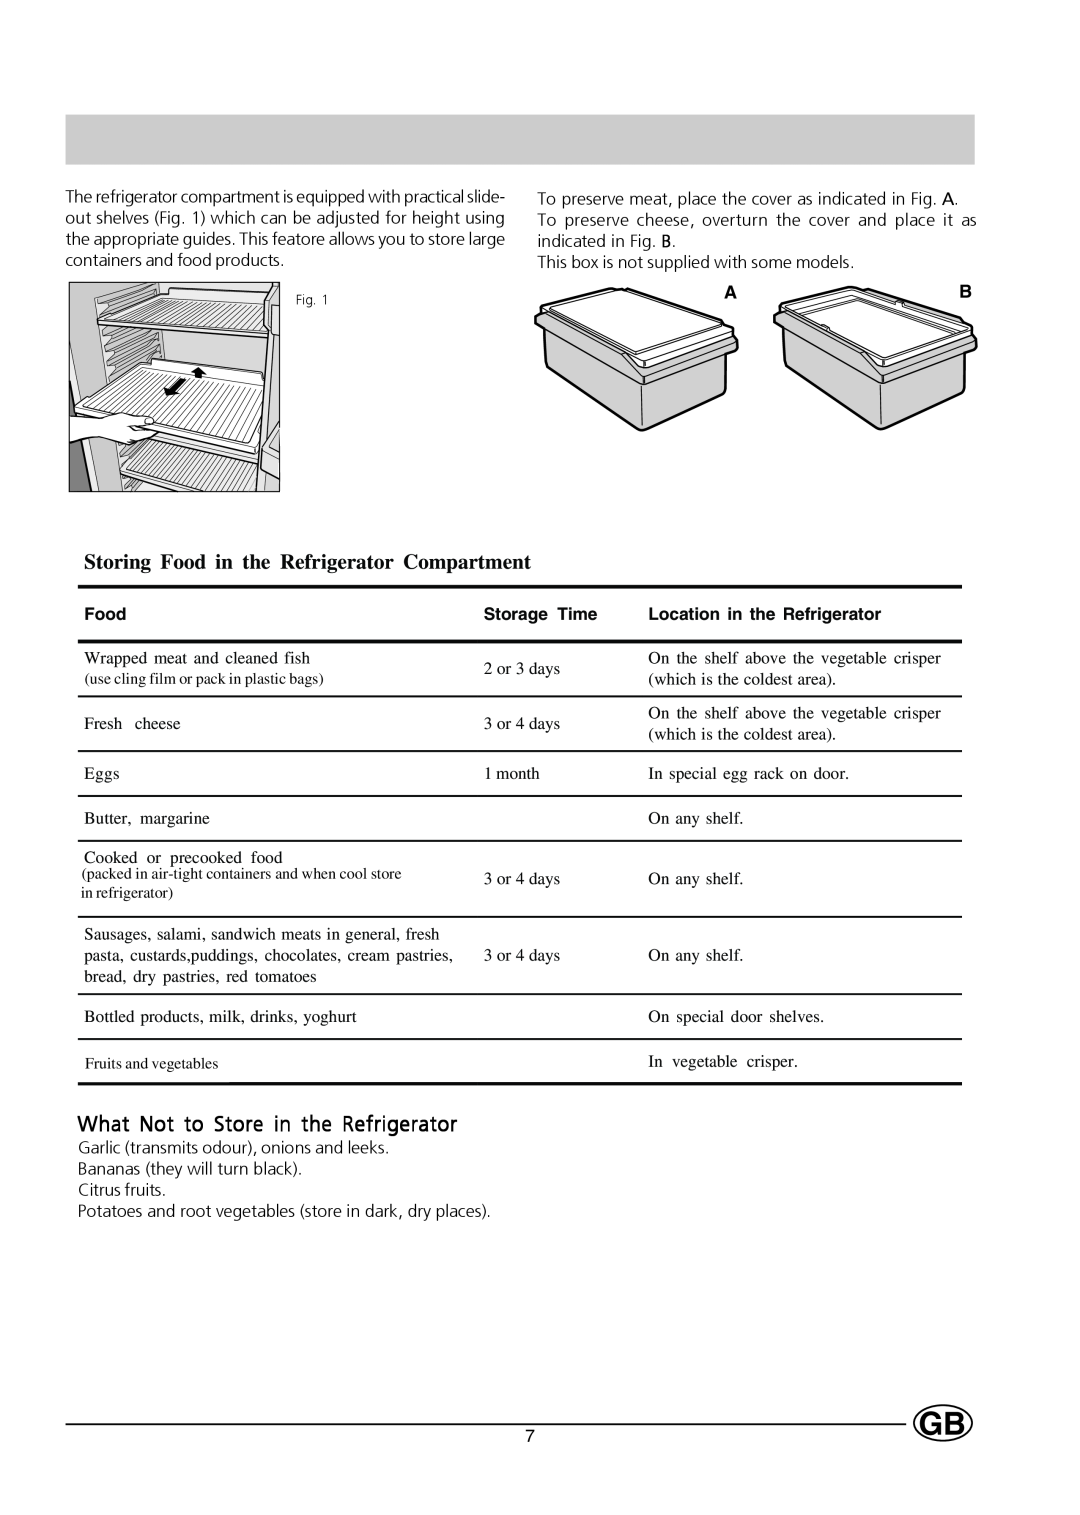 Hotpoint HM450 manual Storing Food in the Refrigerator Compartment, What Not to Store in the Refrigerator, Storage Time 